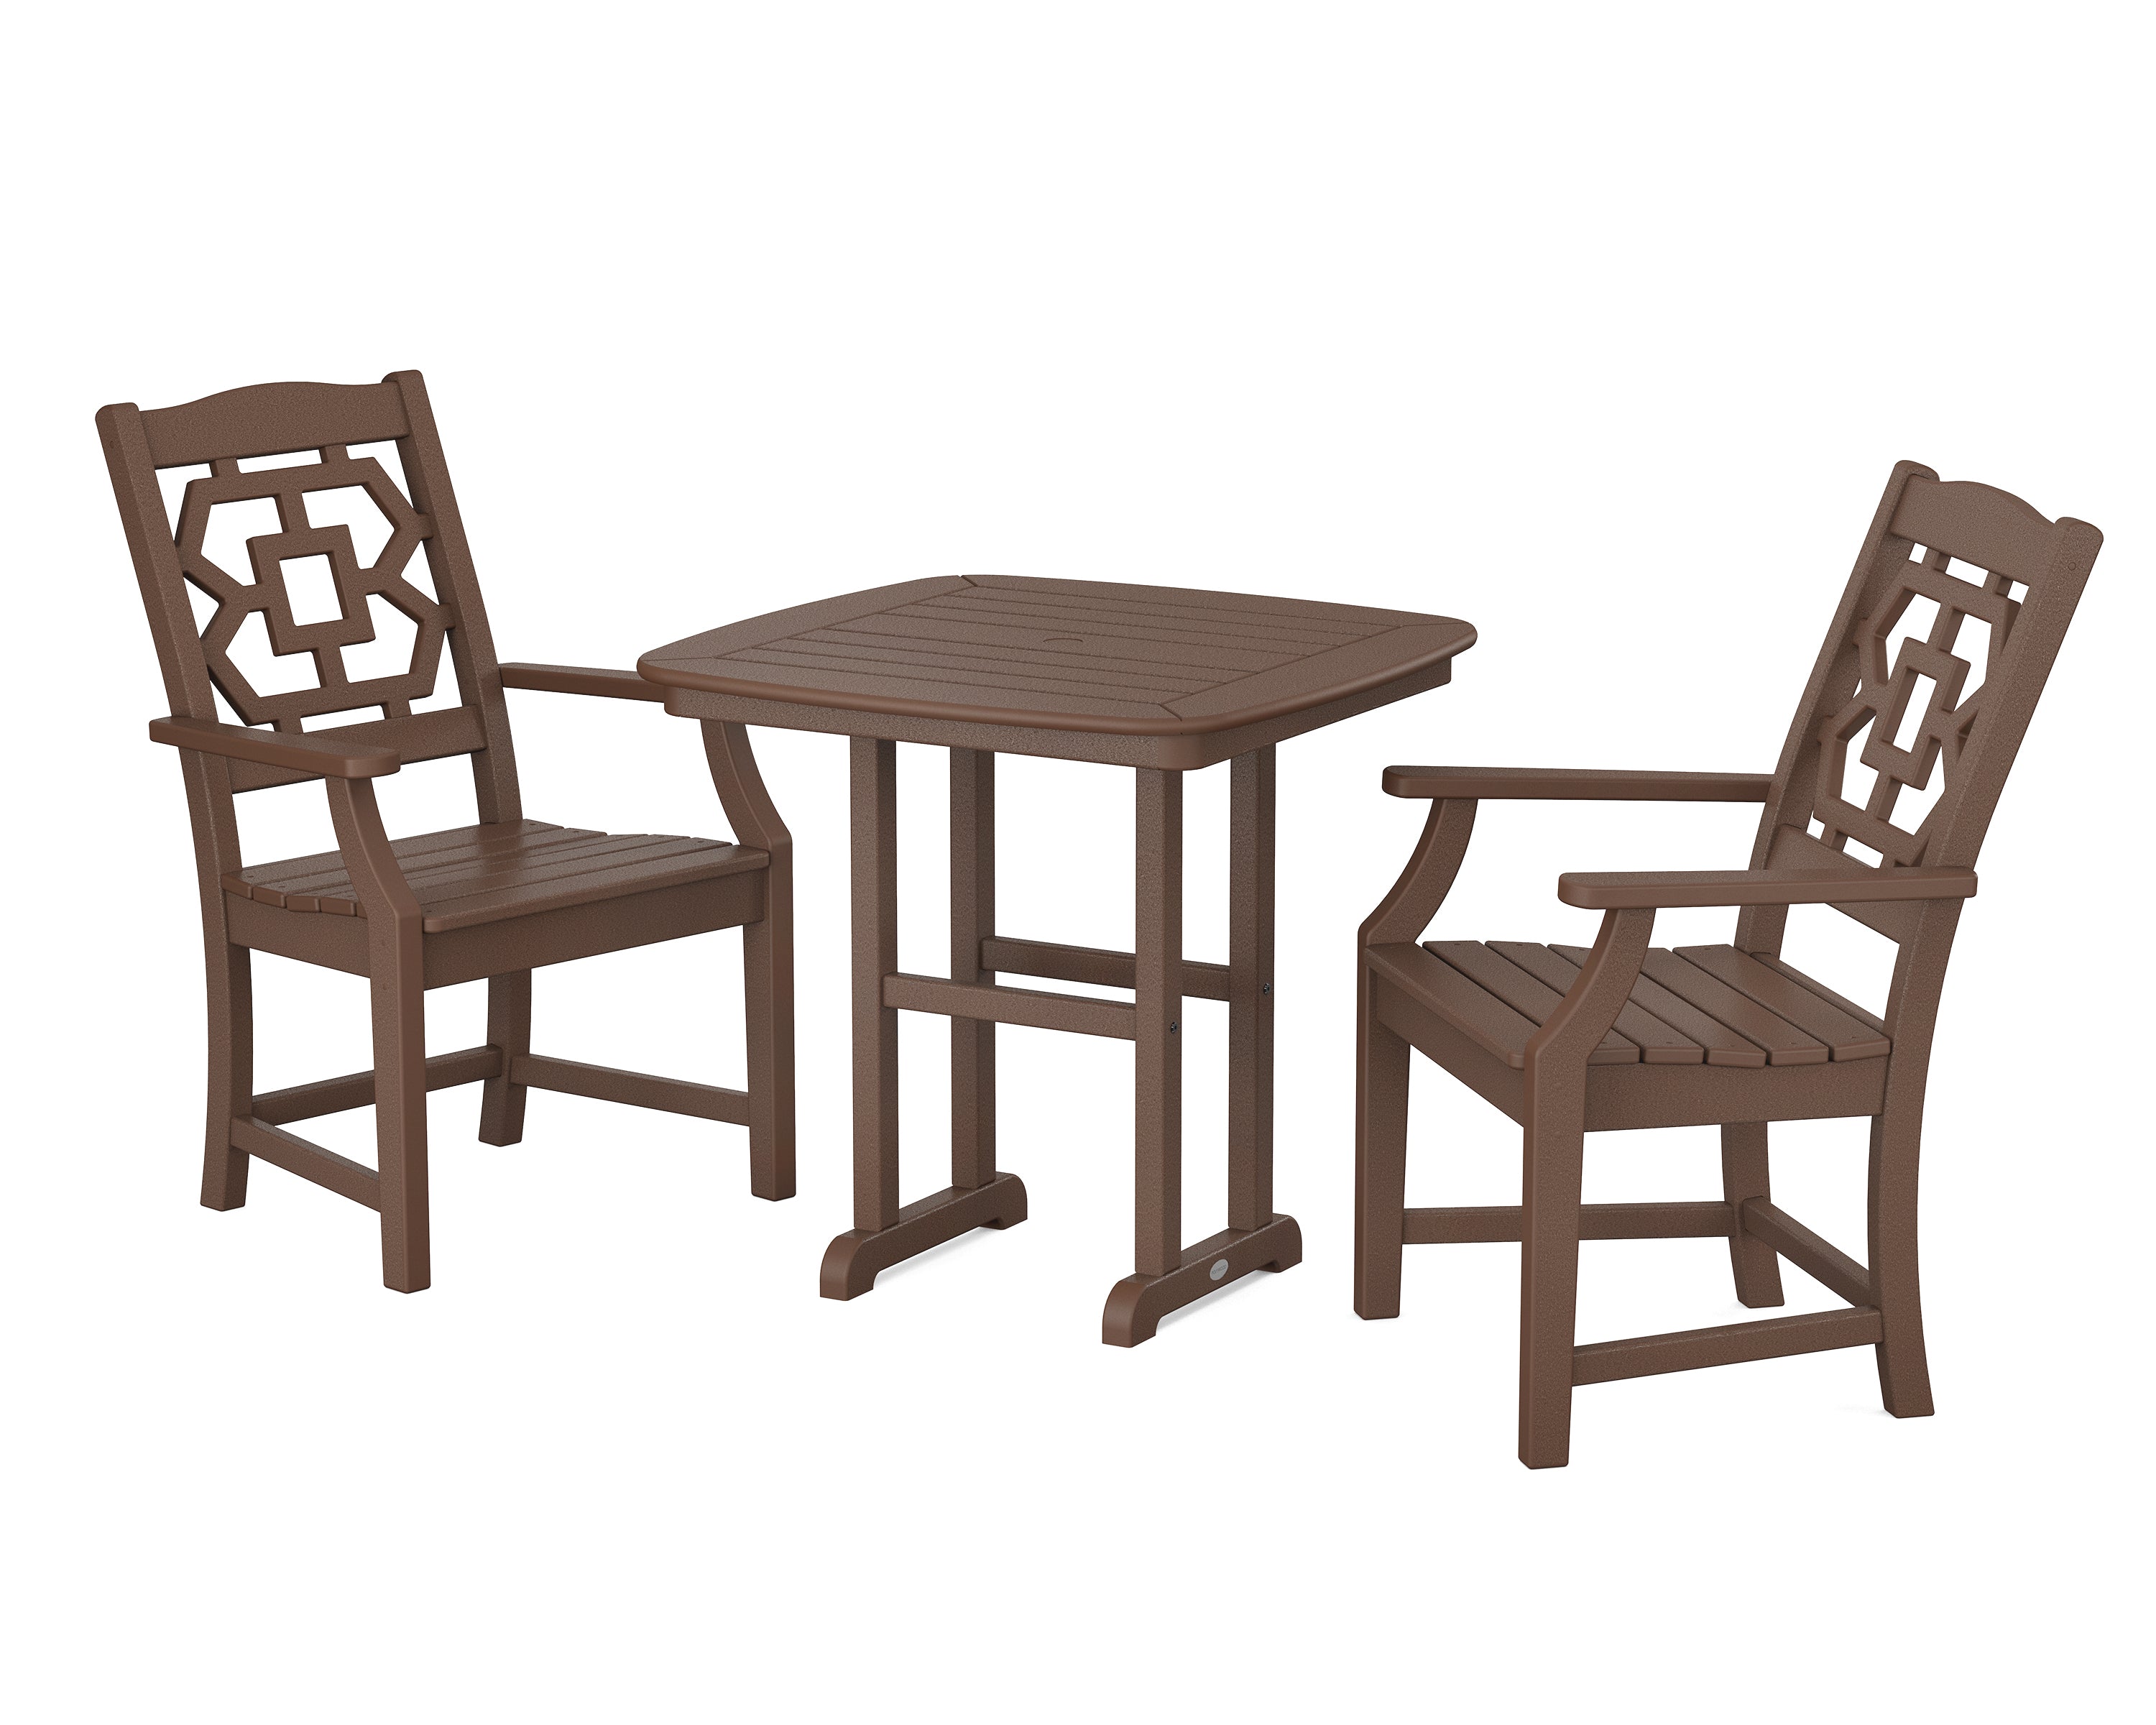 Martha Stewart by POLYWOOD® Chinoiserie 3-Piece Dining Set in Mahogany